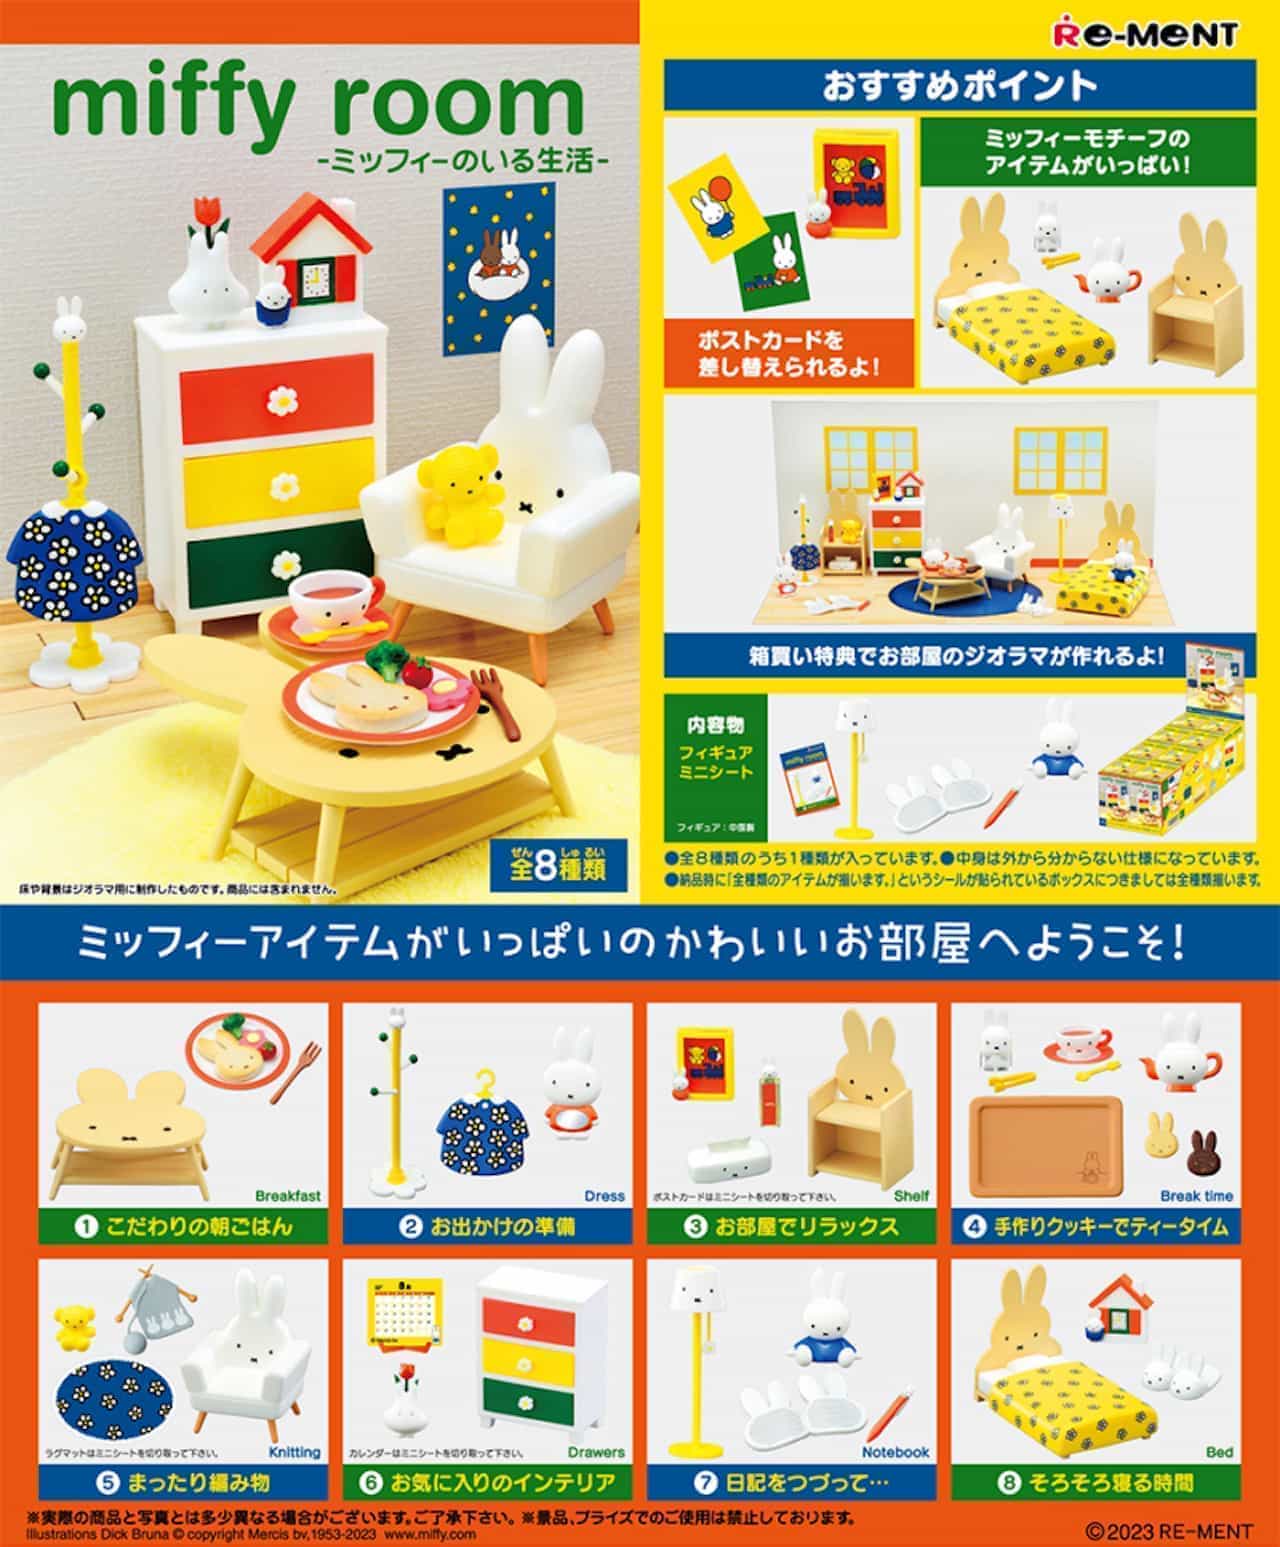 From "miffy room -Life with Miffy-" lement